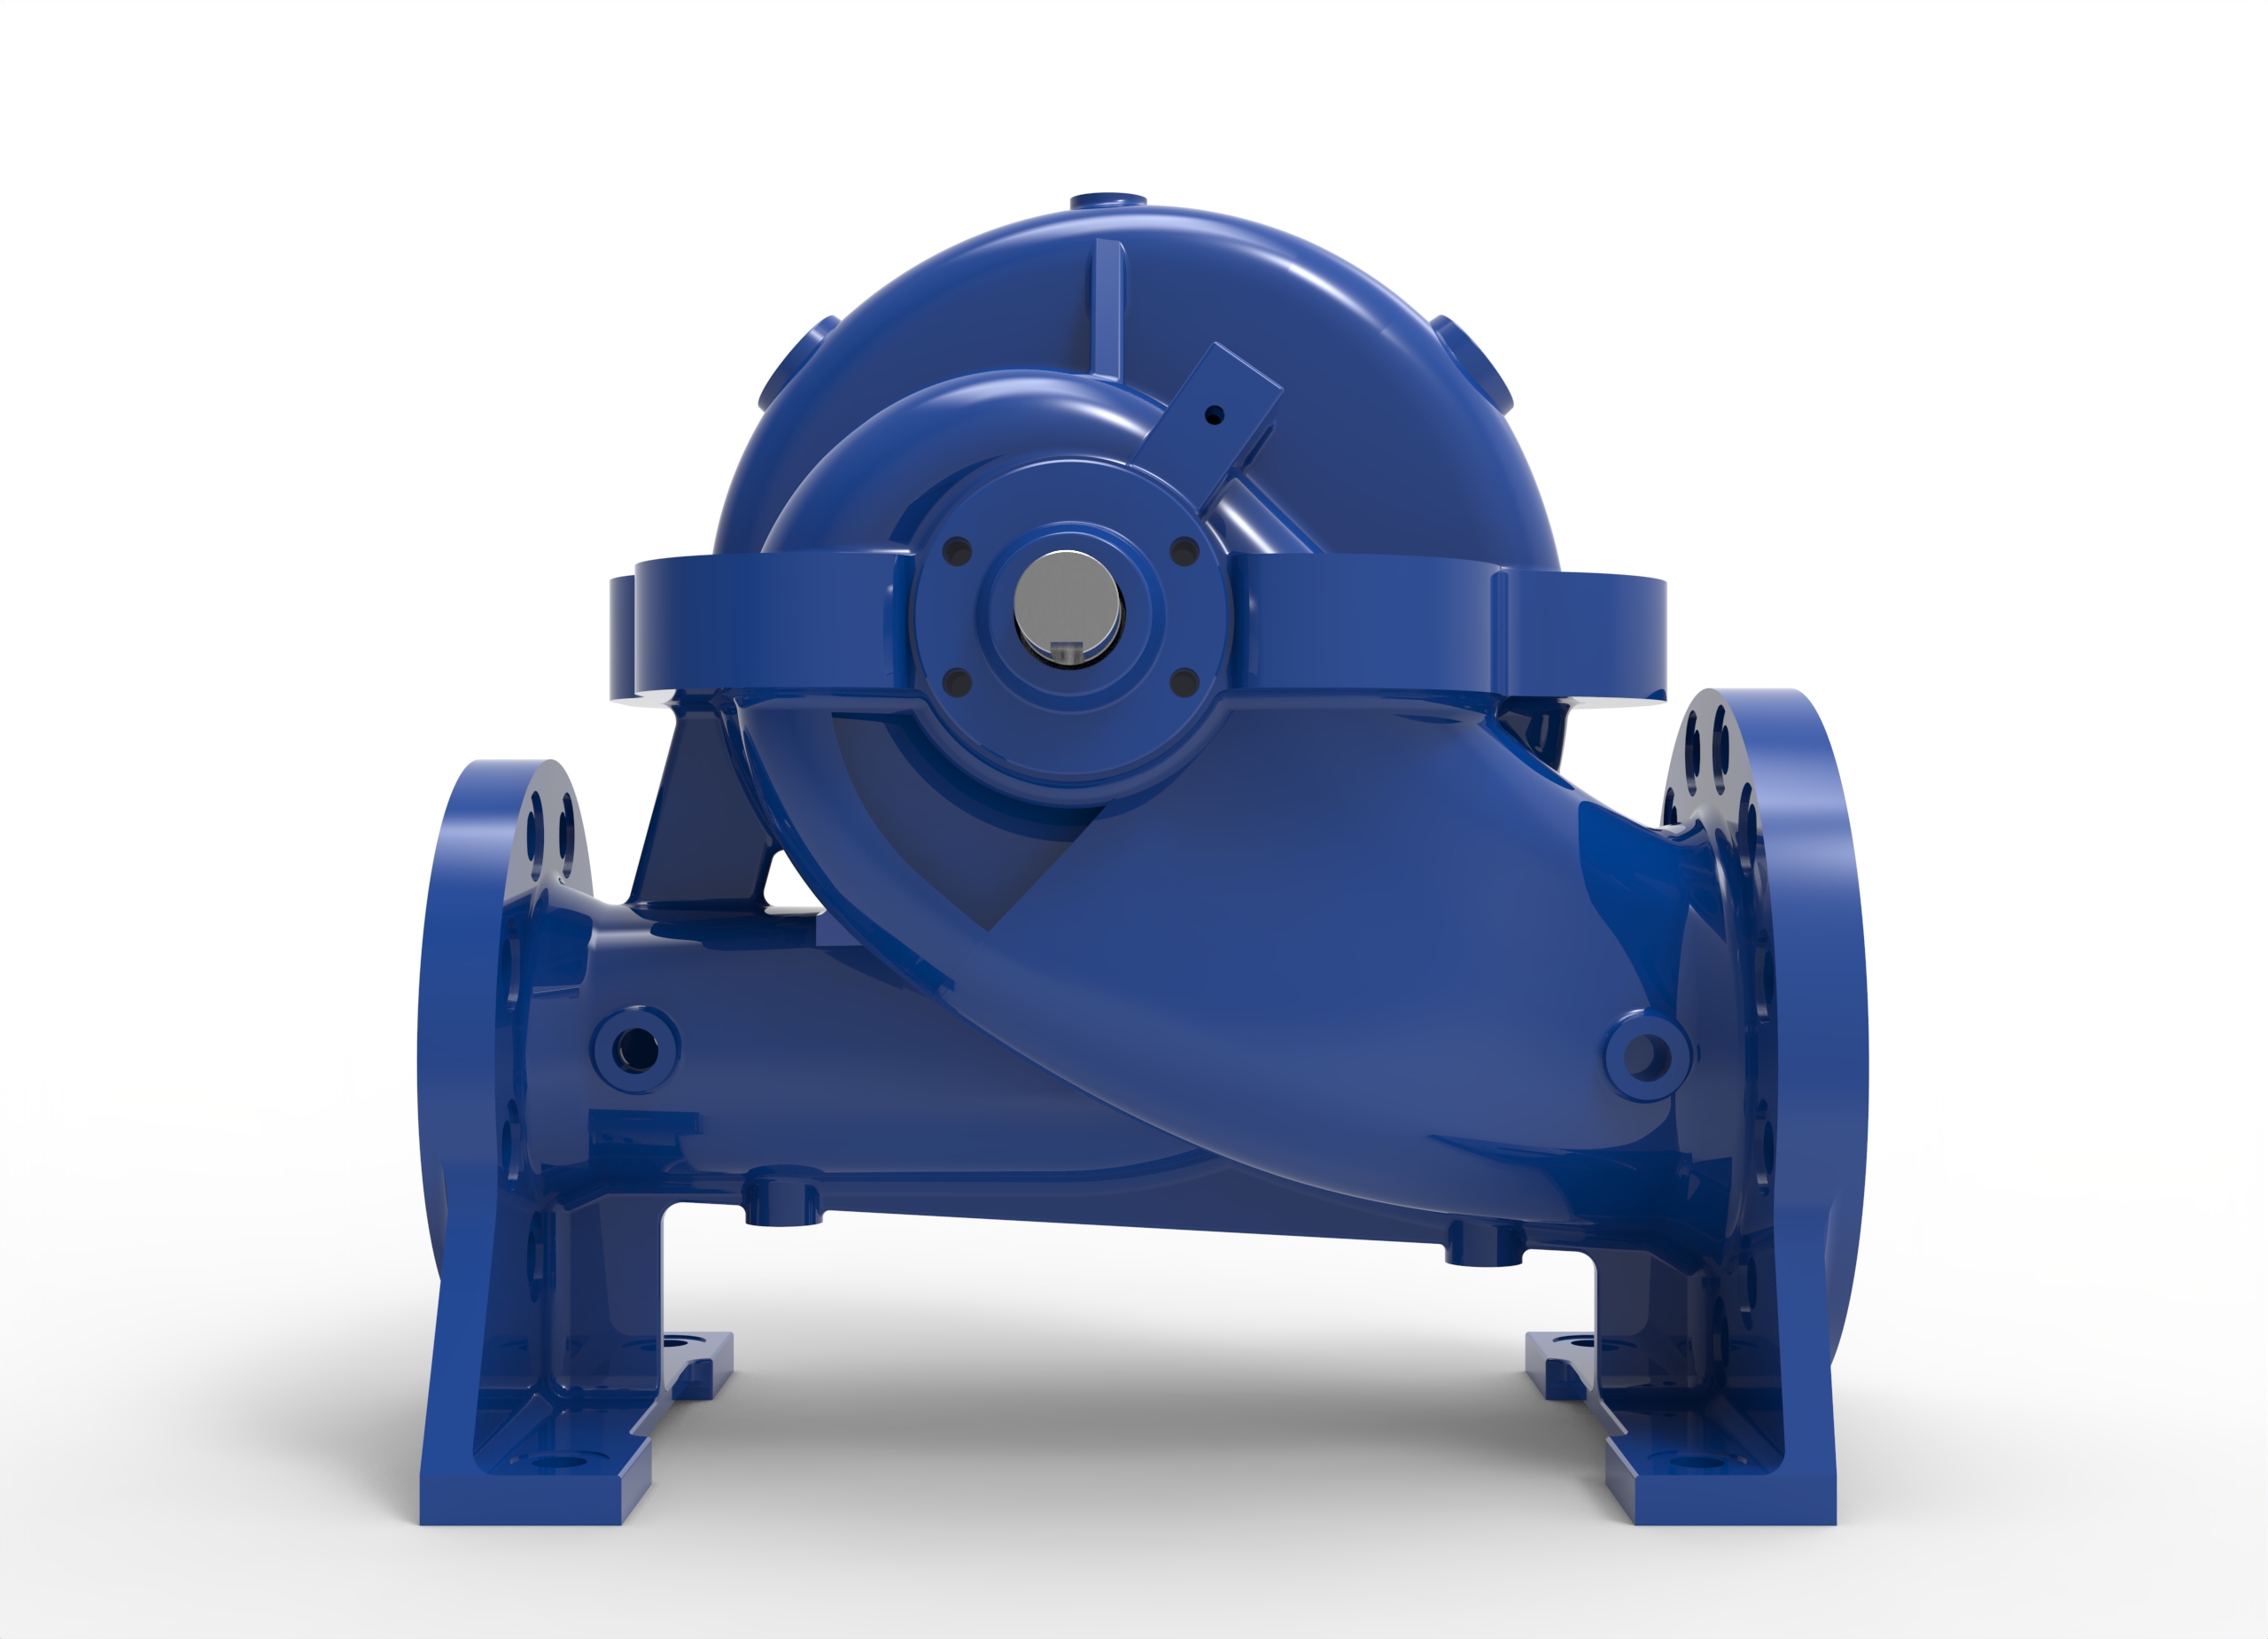 Backside view of a Termomeccanica Pompe HSS Patented Centrifugal Pump manufactured by Trillium Flow Technologies